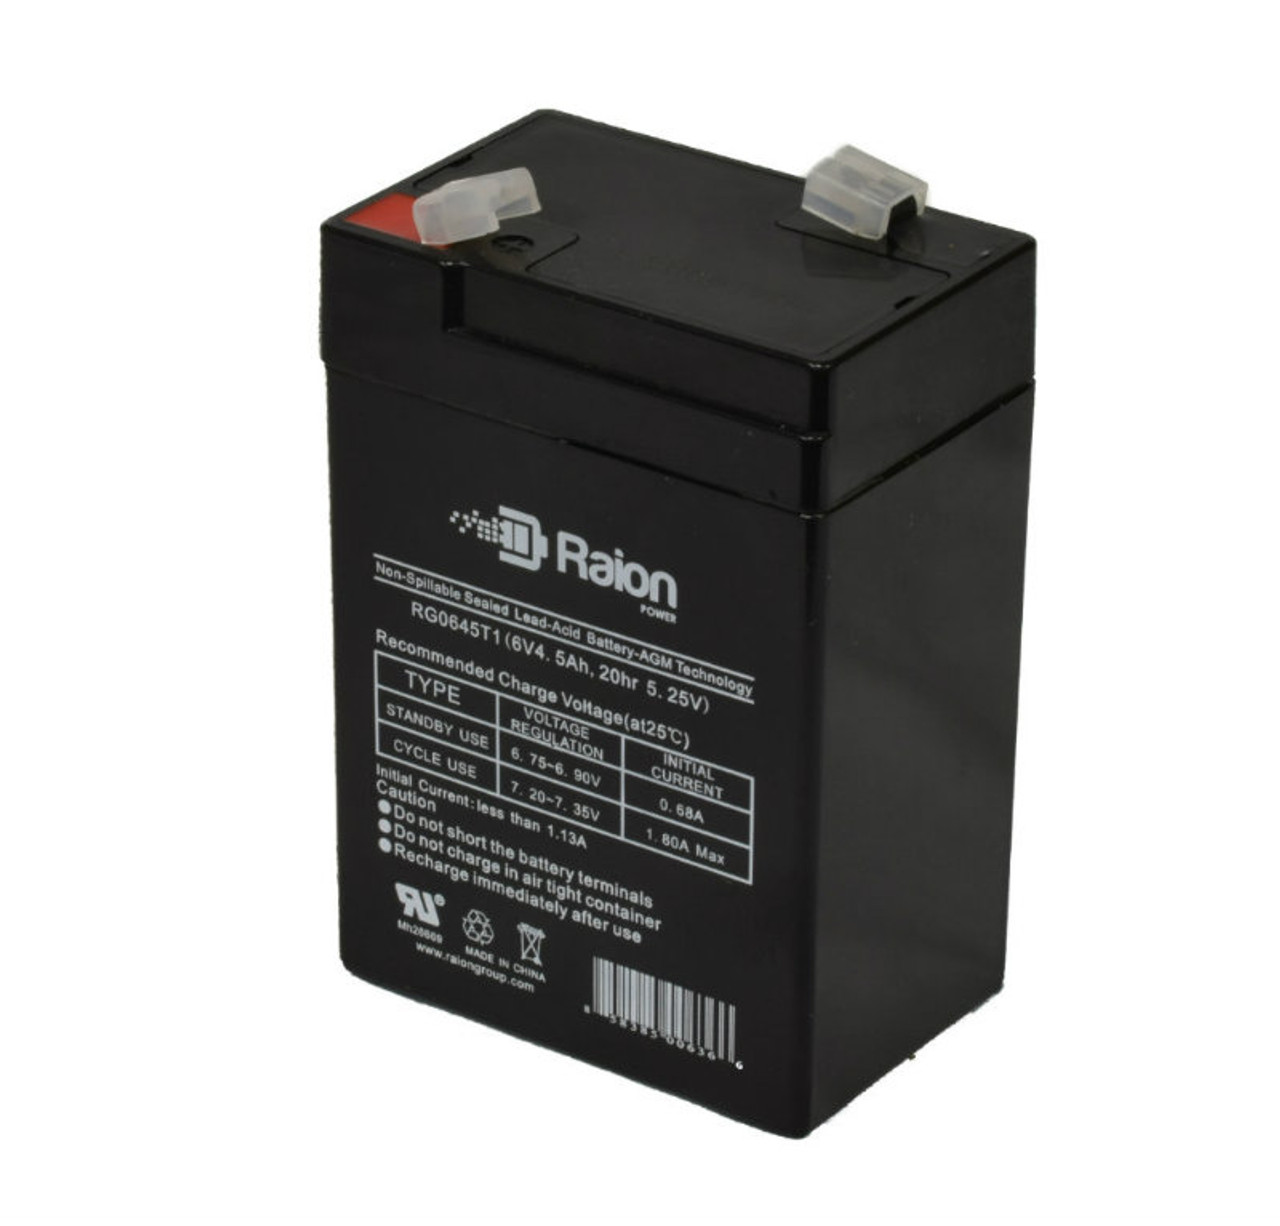 Raion Power RG0645T1 6V 4.5Ah Replacement Battery Cartridge for Chloride 1000010045